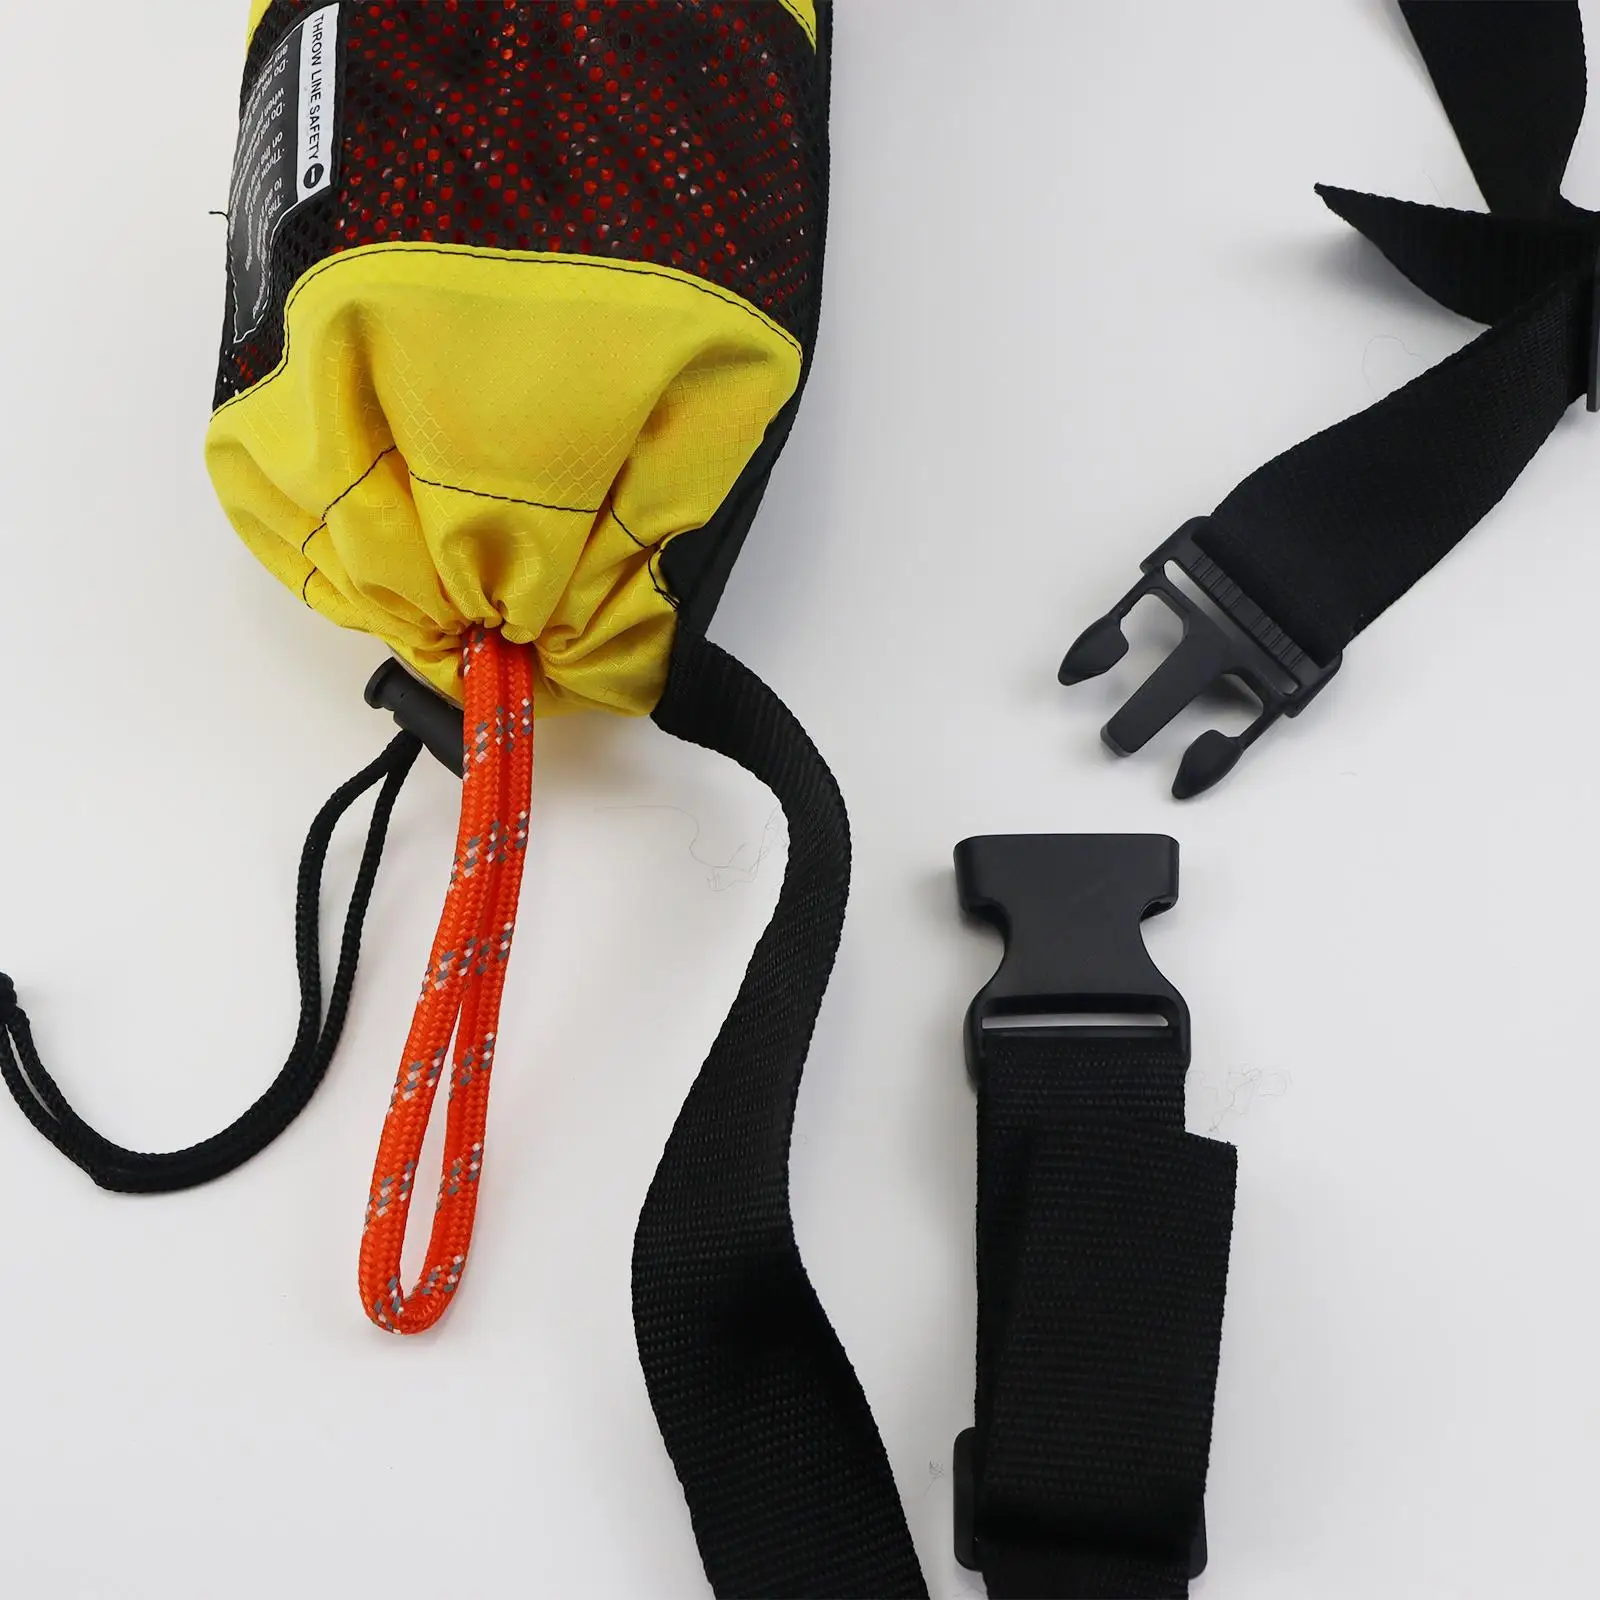 Boater`S Throw Bag Throw Rope Throwable Outdoor Accessory Equipment